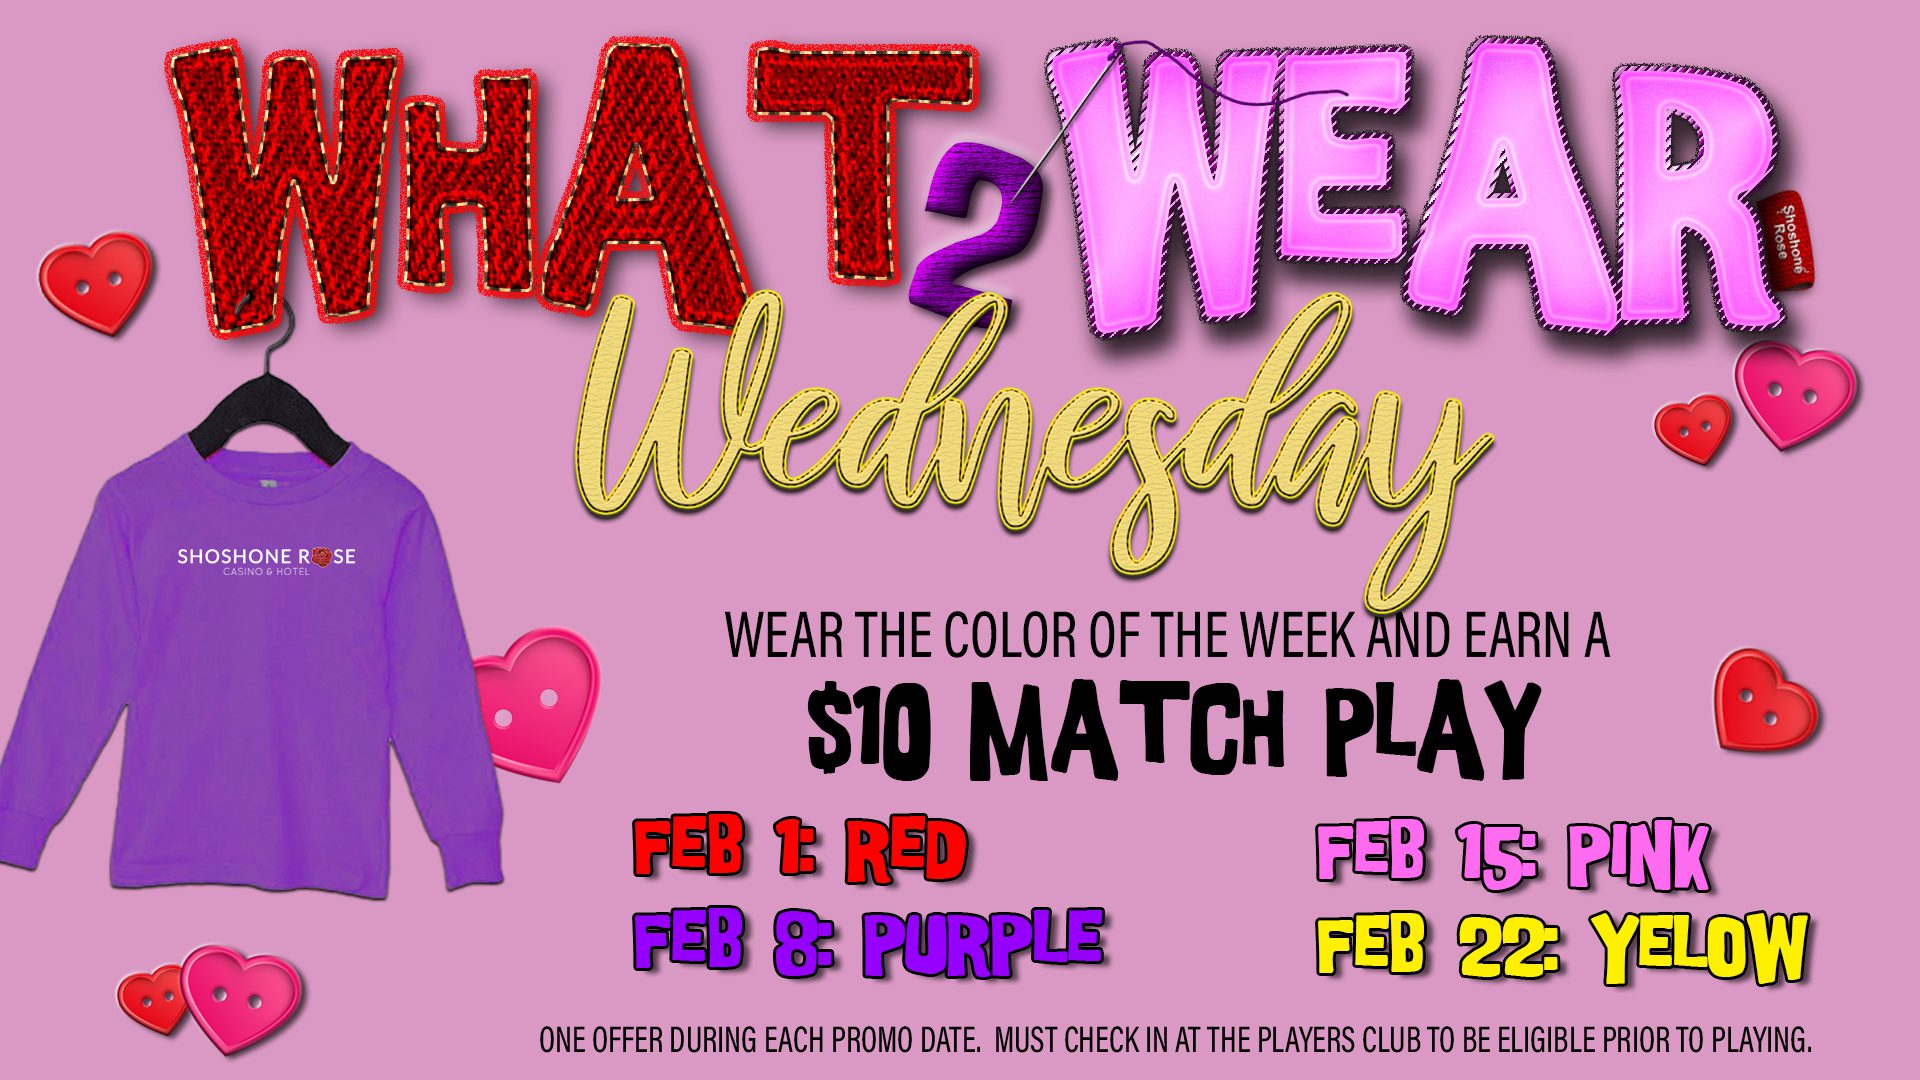 A poster for what 2 wear wednesday.